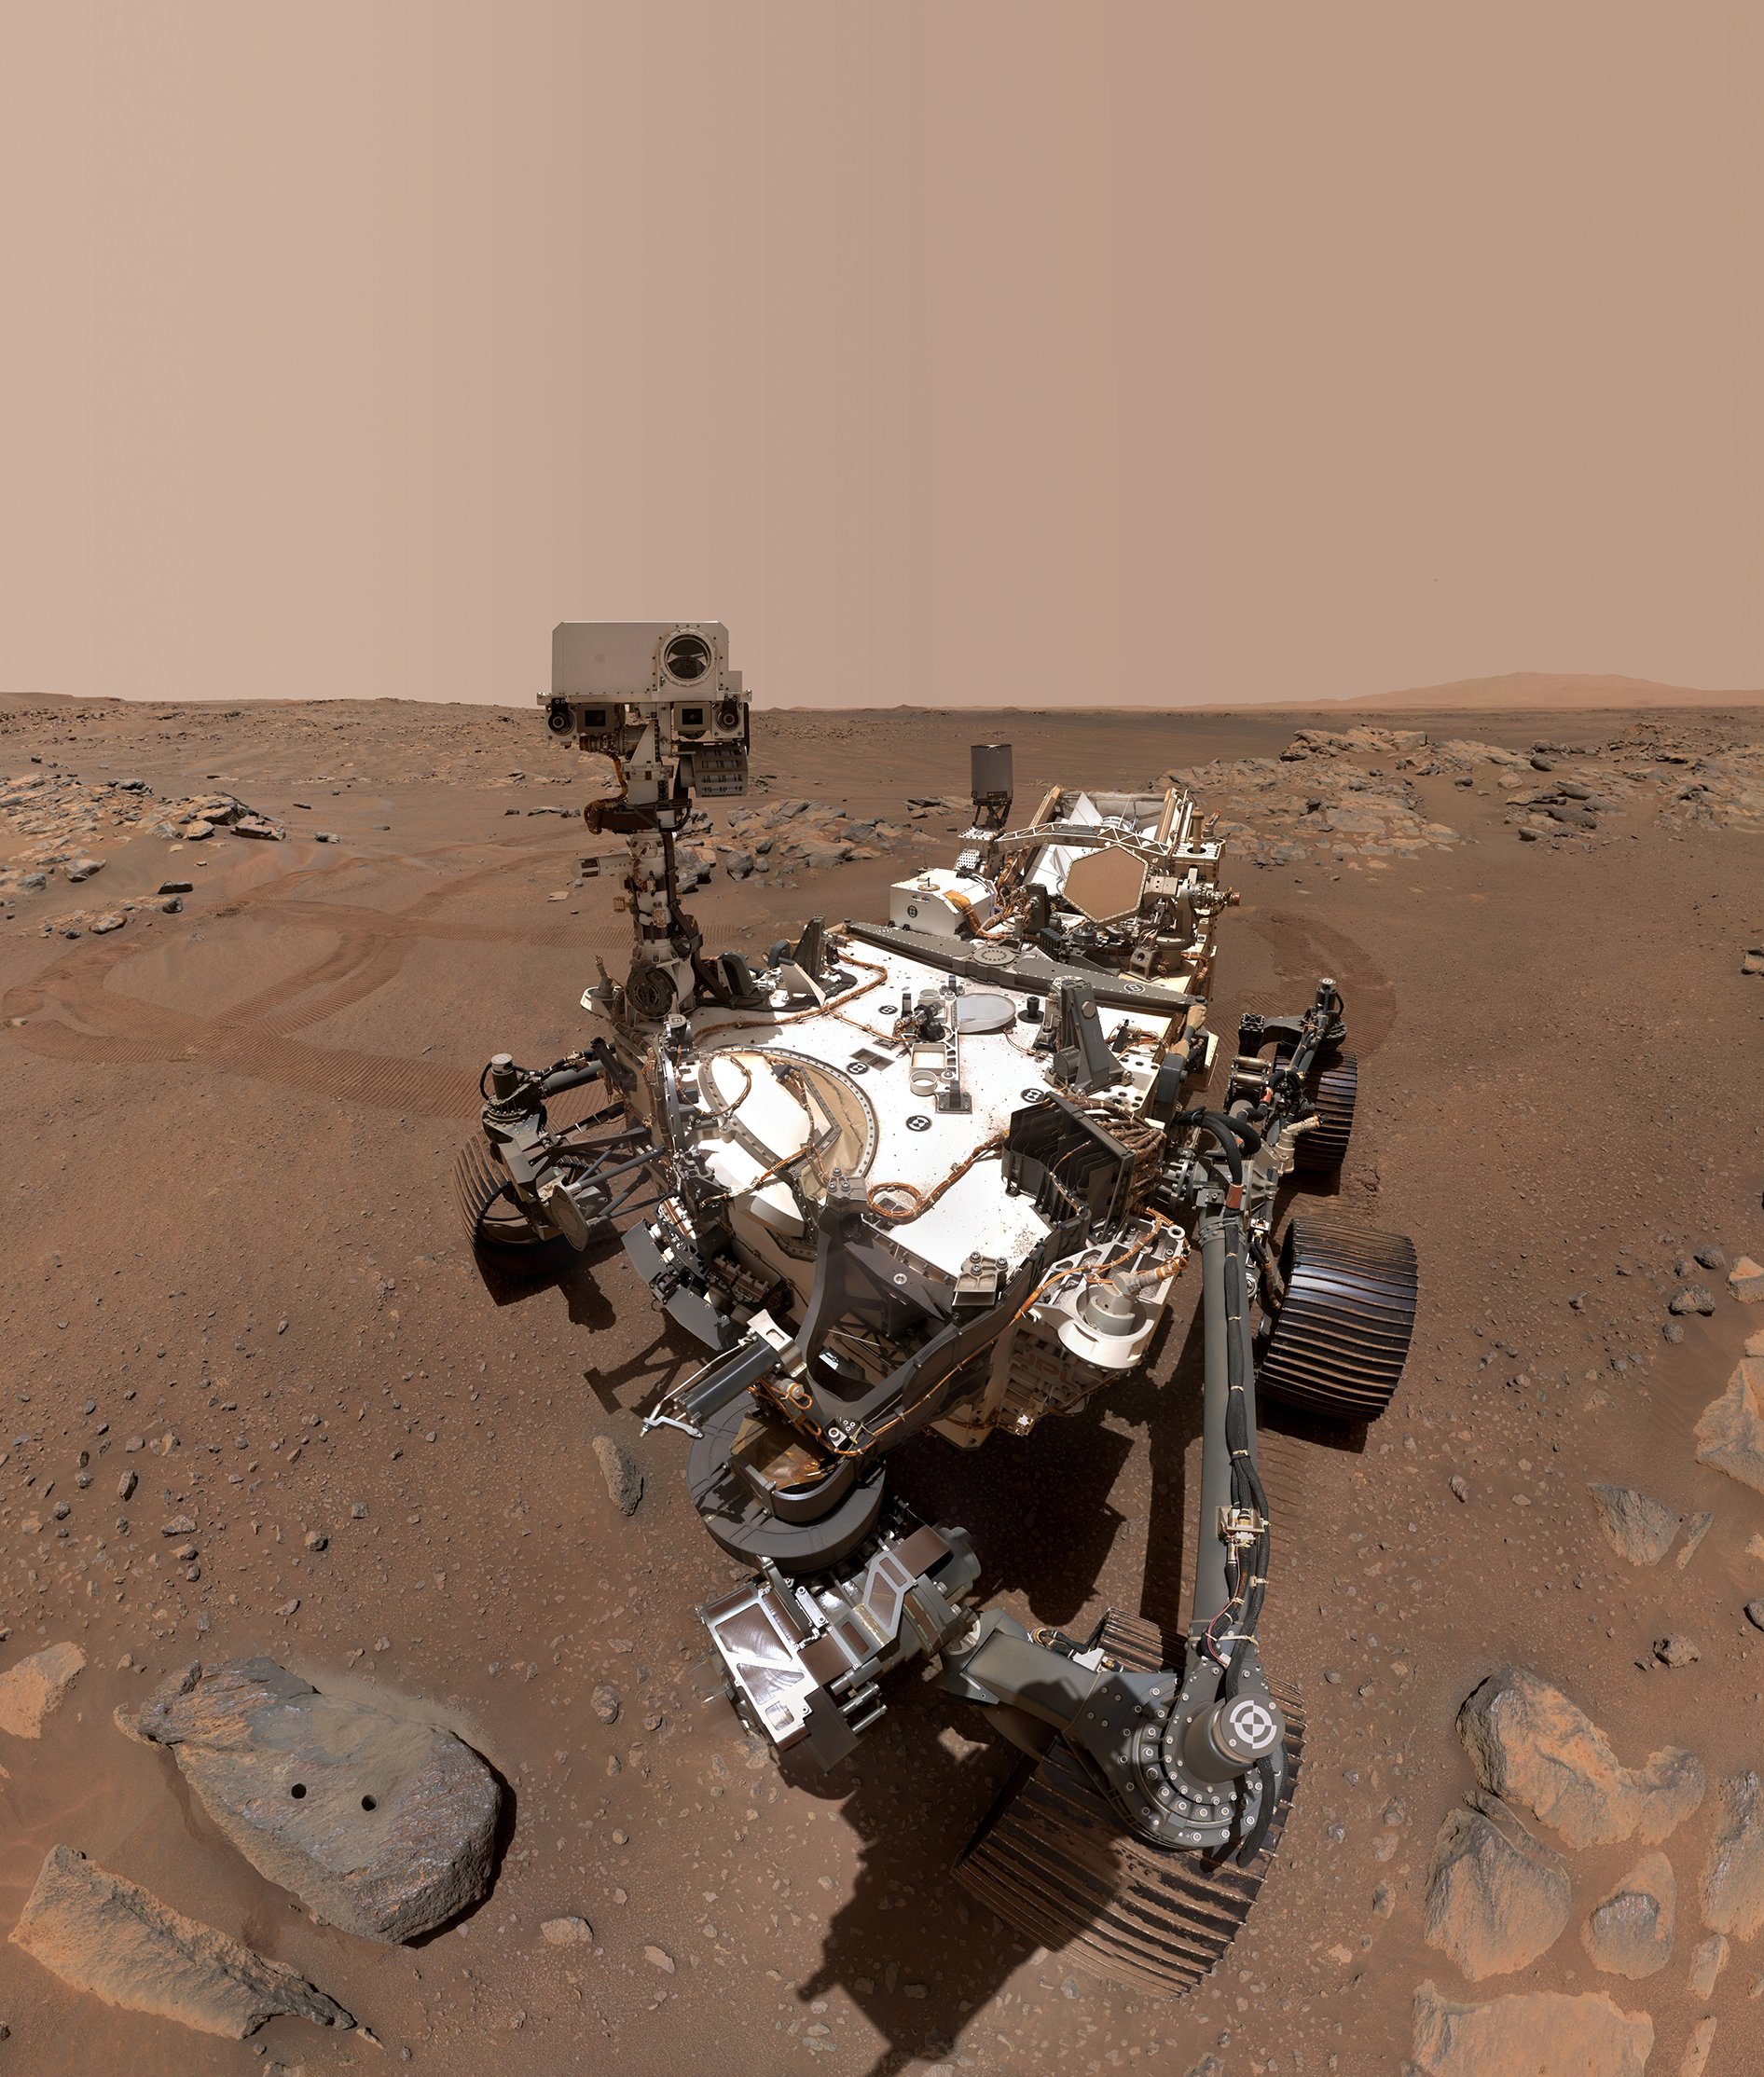 Self-portrait photo from NASA’s Mars Perseverance rover shows the vehicle parked in front of a rock with two holes in it, from which the rover has extracted two rock samples. Tracks from the rover’s wheels are visible on the dusty ground surface in the background.